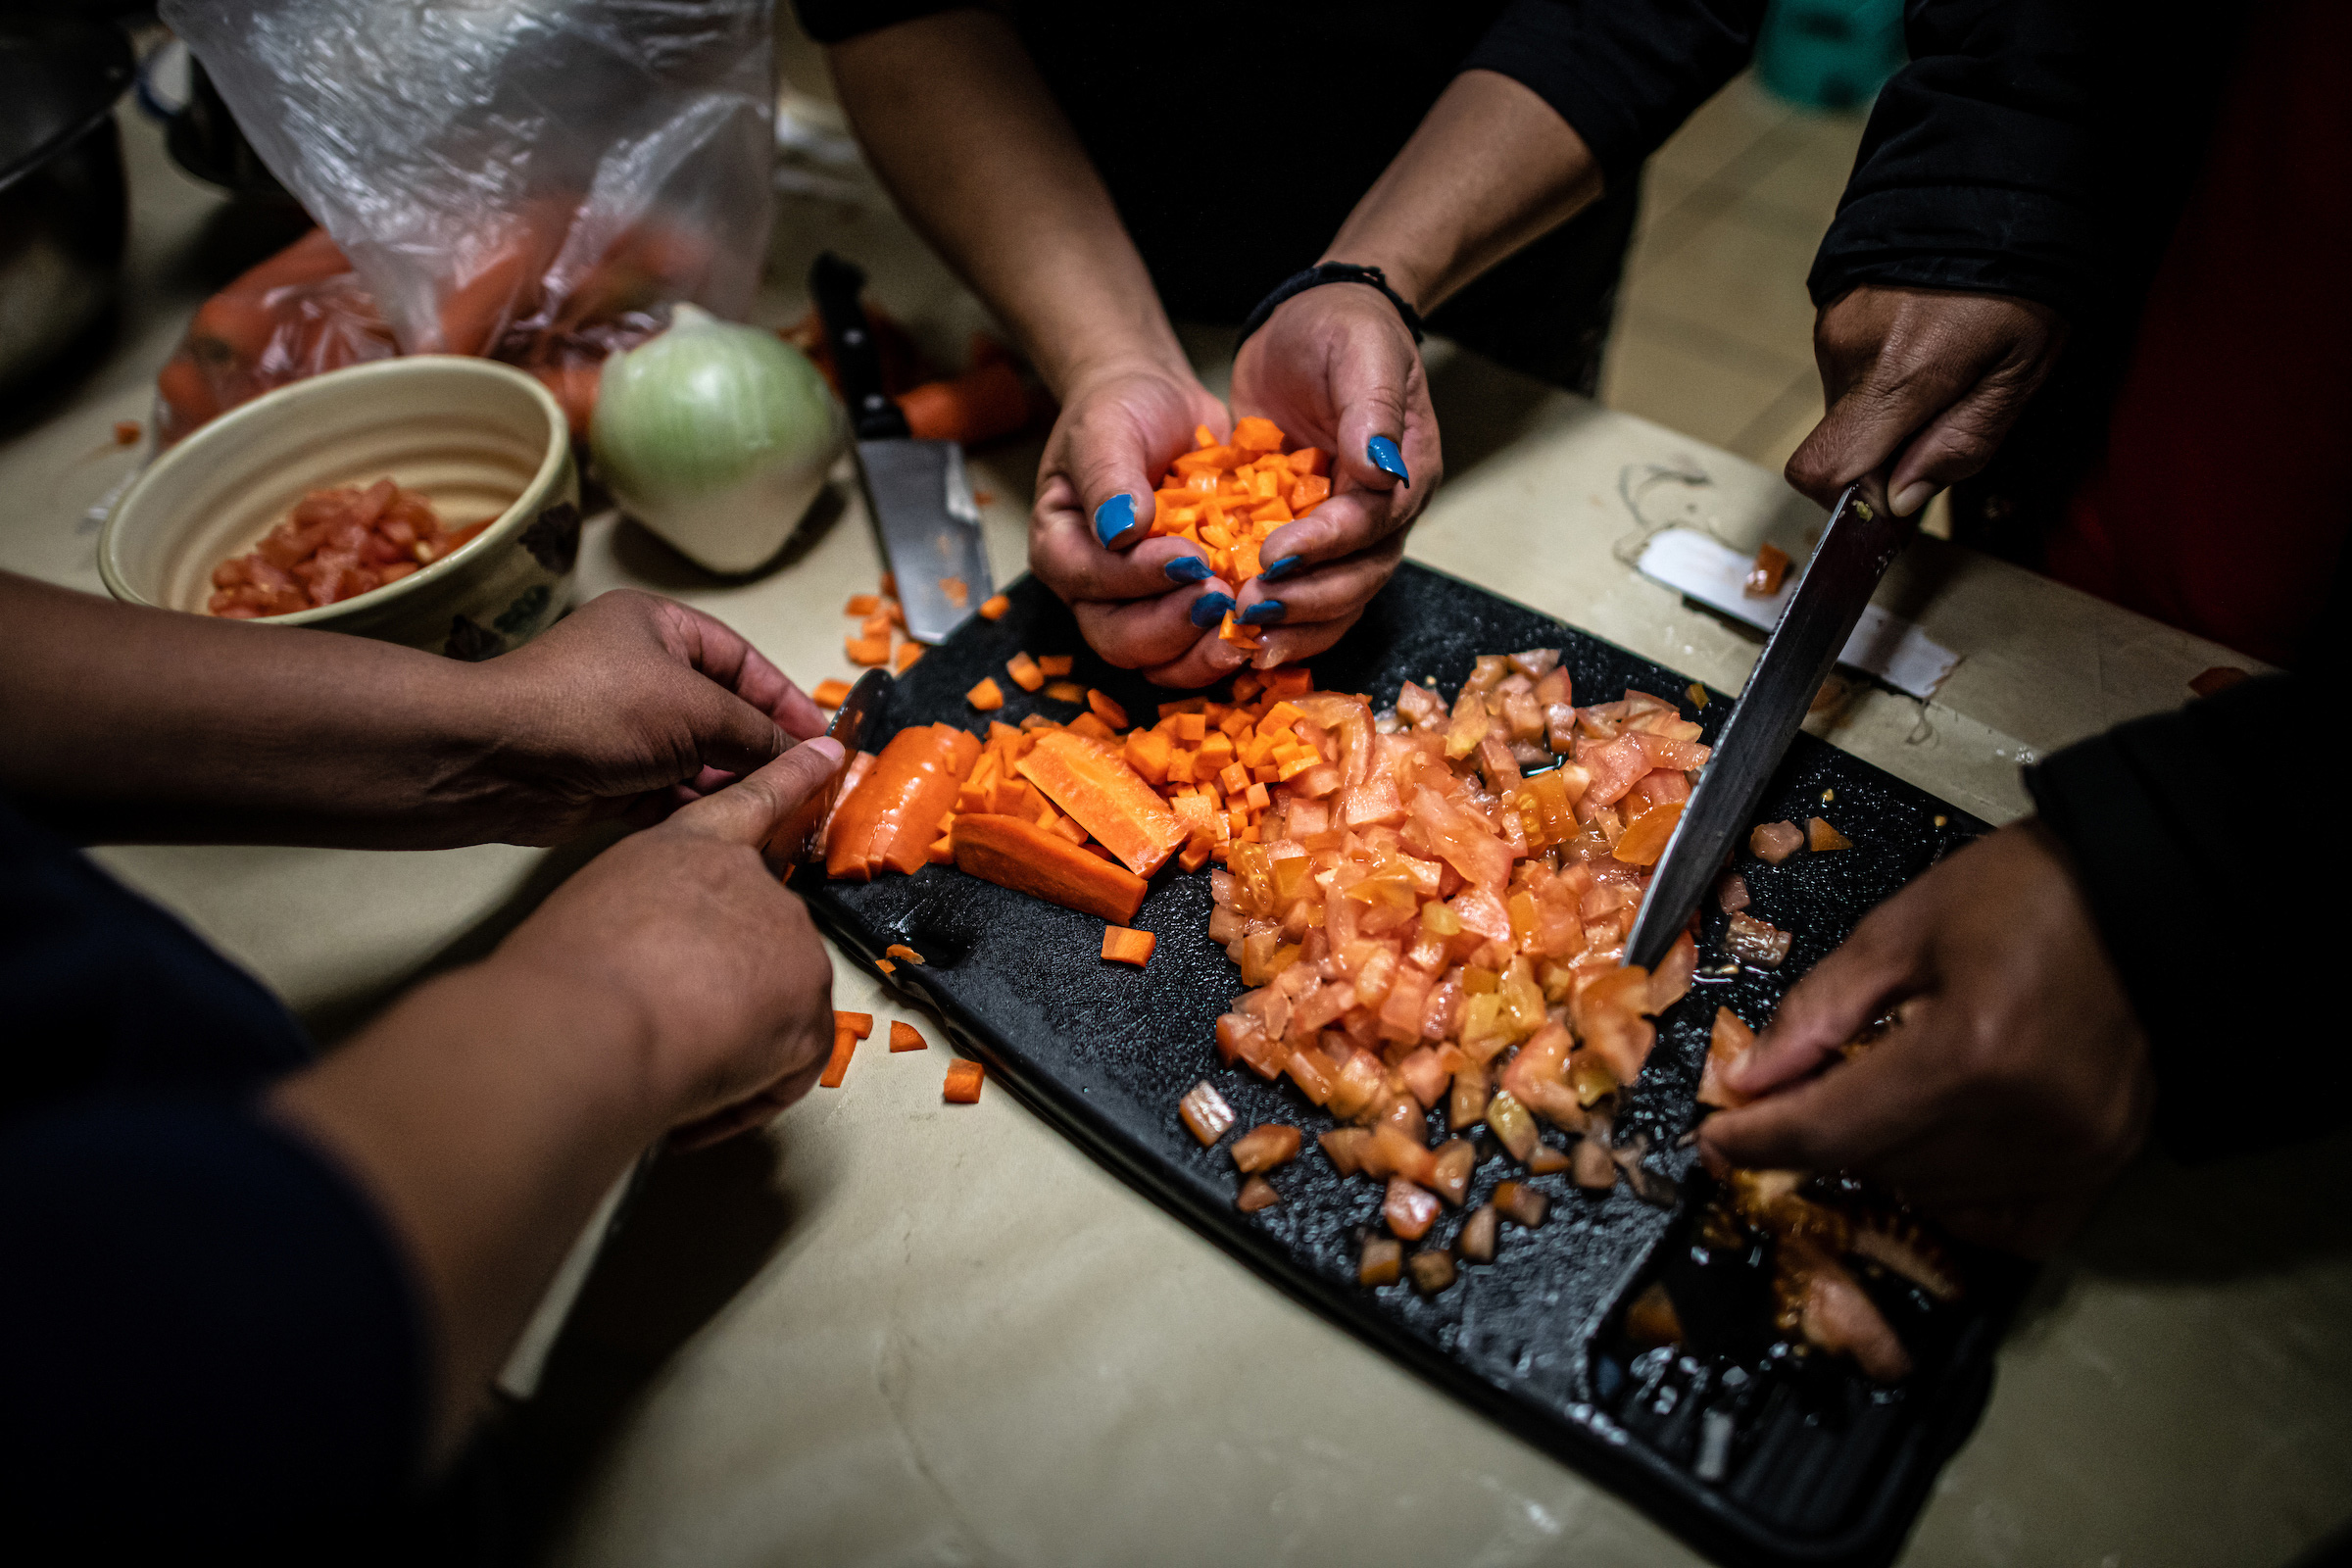 Shelter guests chop carrots while cooking soup together in the kitchen. (Meridith Kohut for TIME)